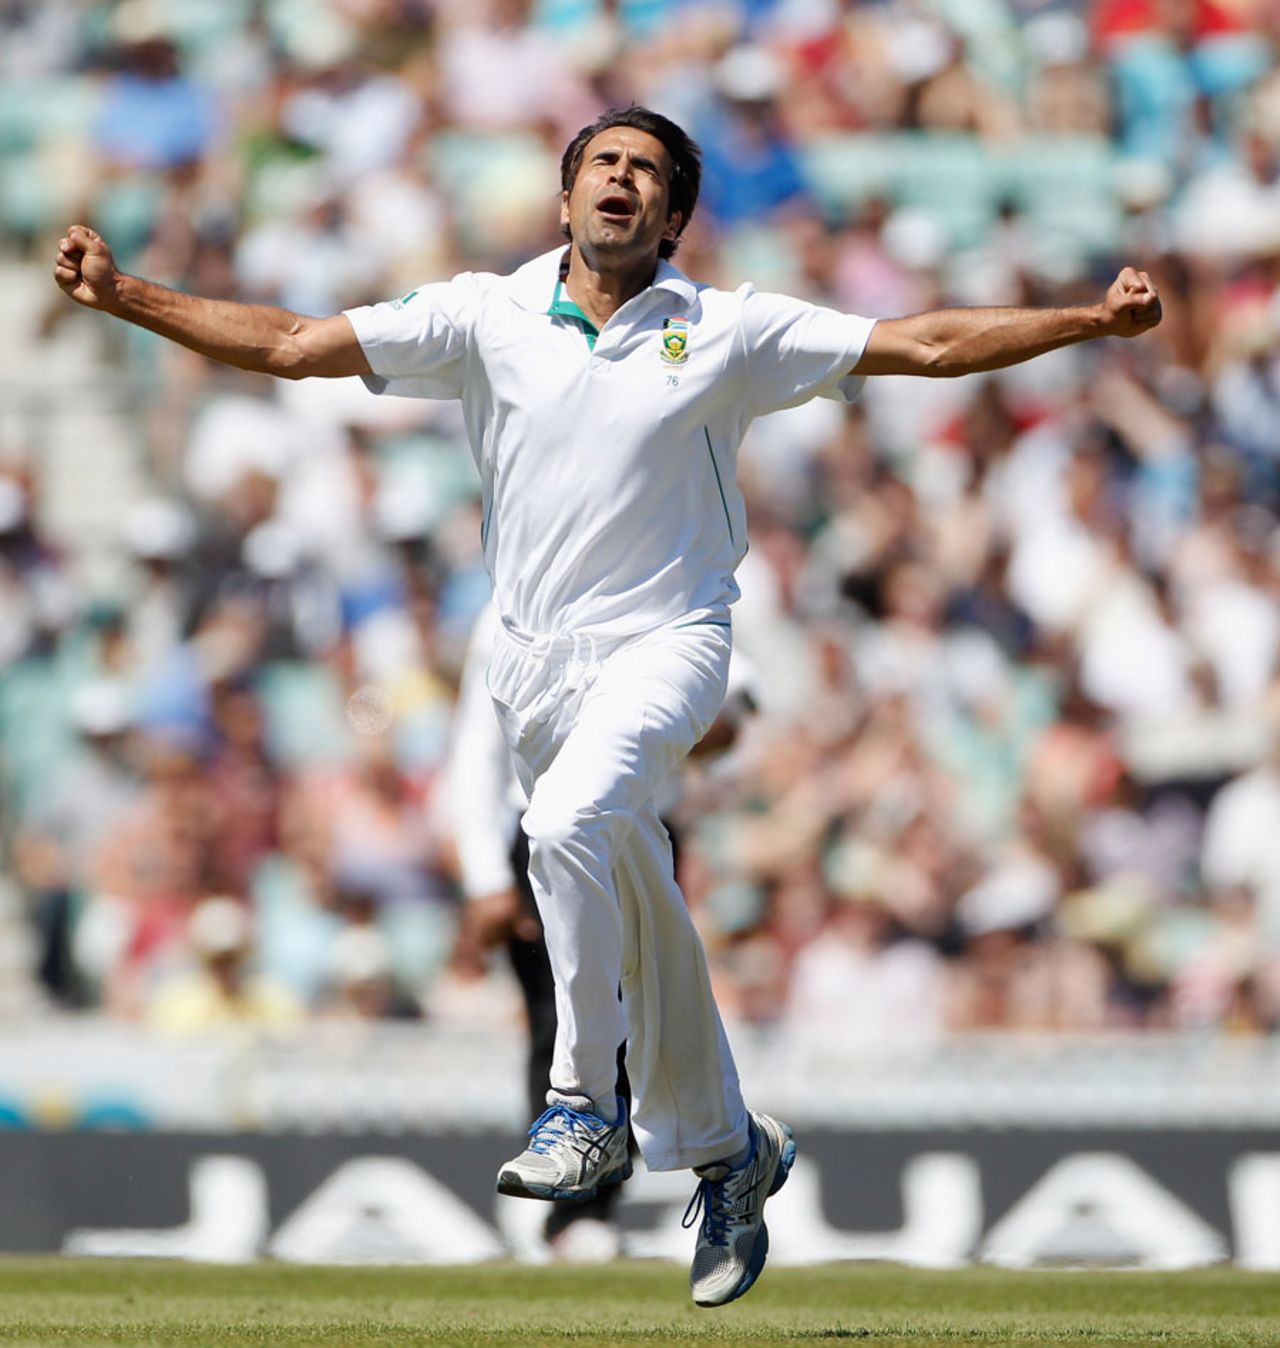 Imran Tahir claimed the key wicket of Matt Prior, England v South Africa, 1st Test, The Oval, 5th Day, July, 23, 2012